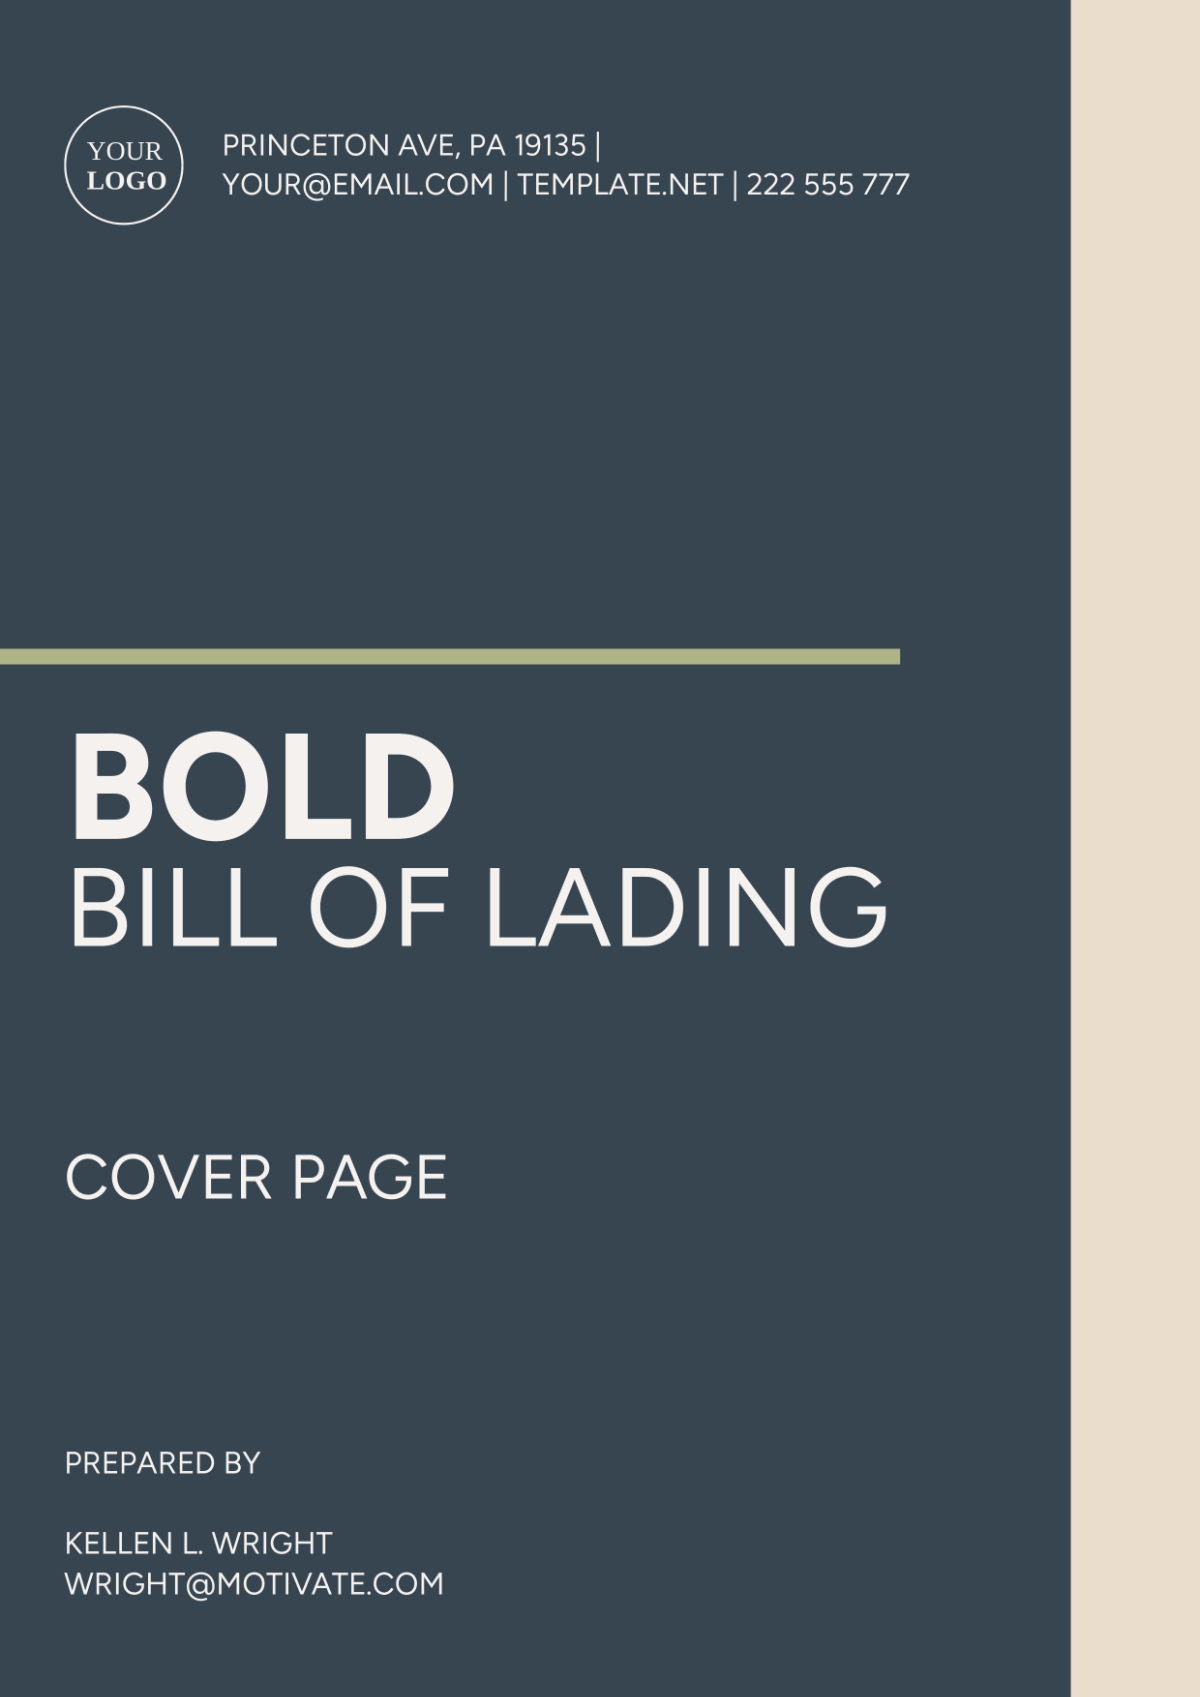 Bold Bill of Lading Cover Page